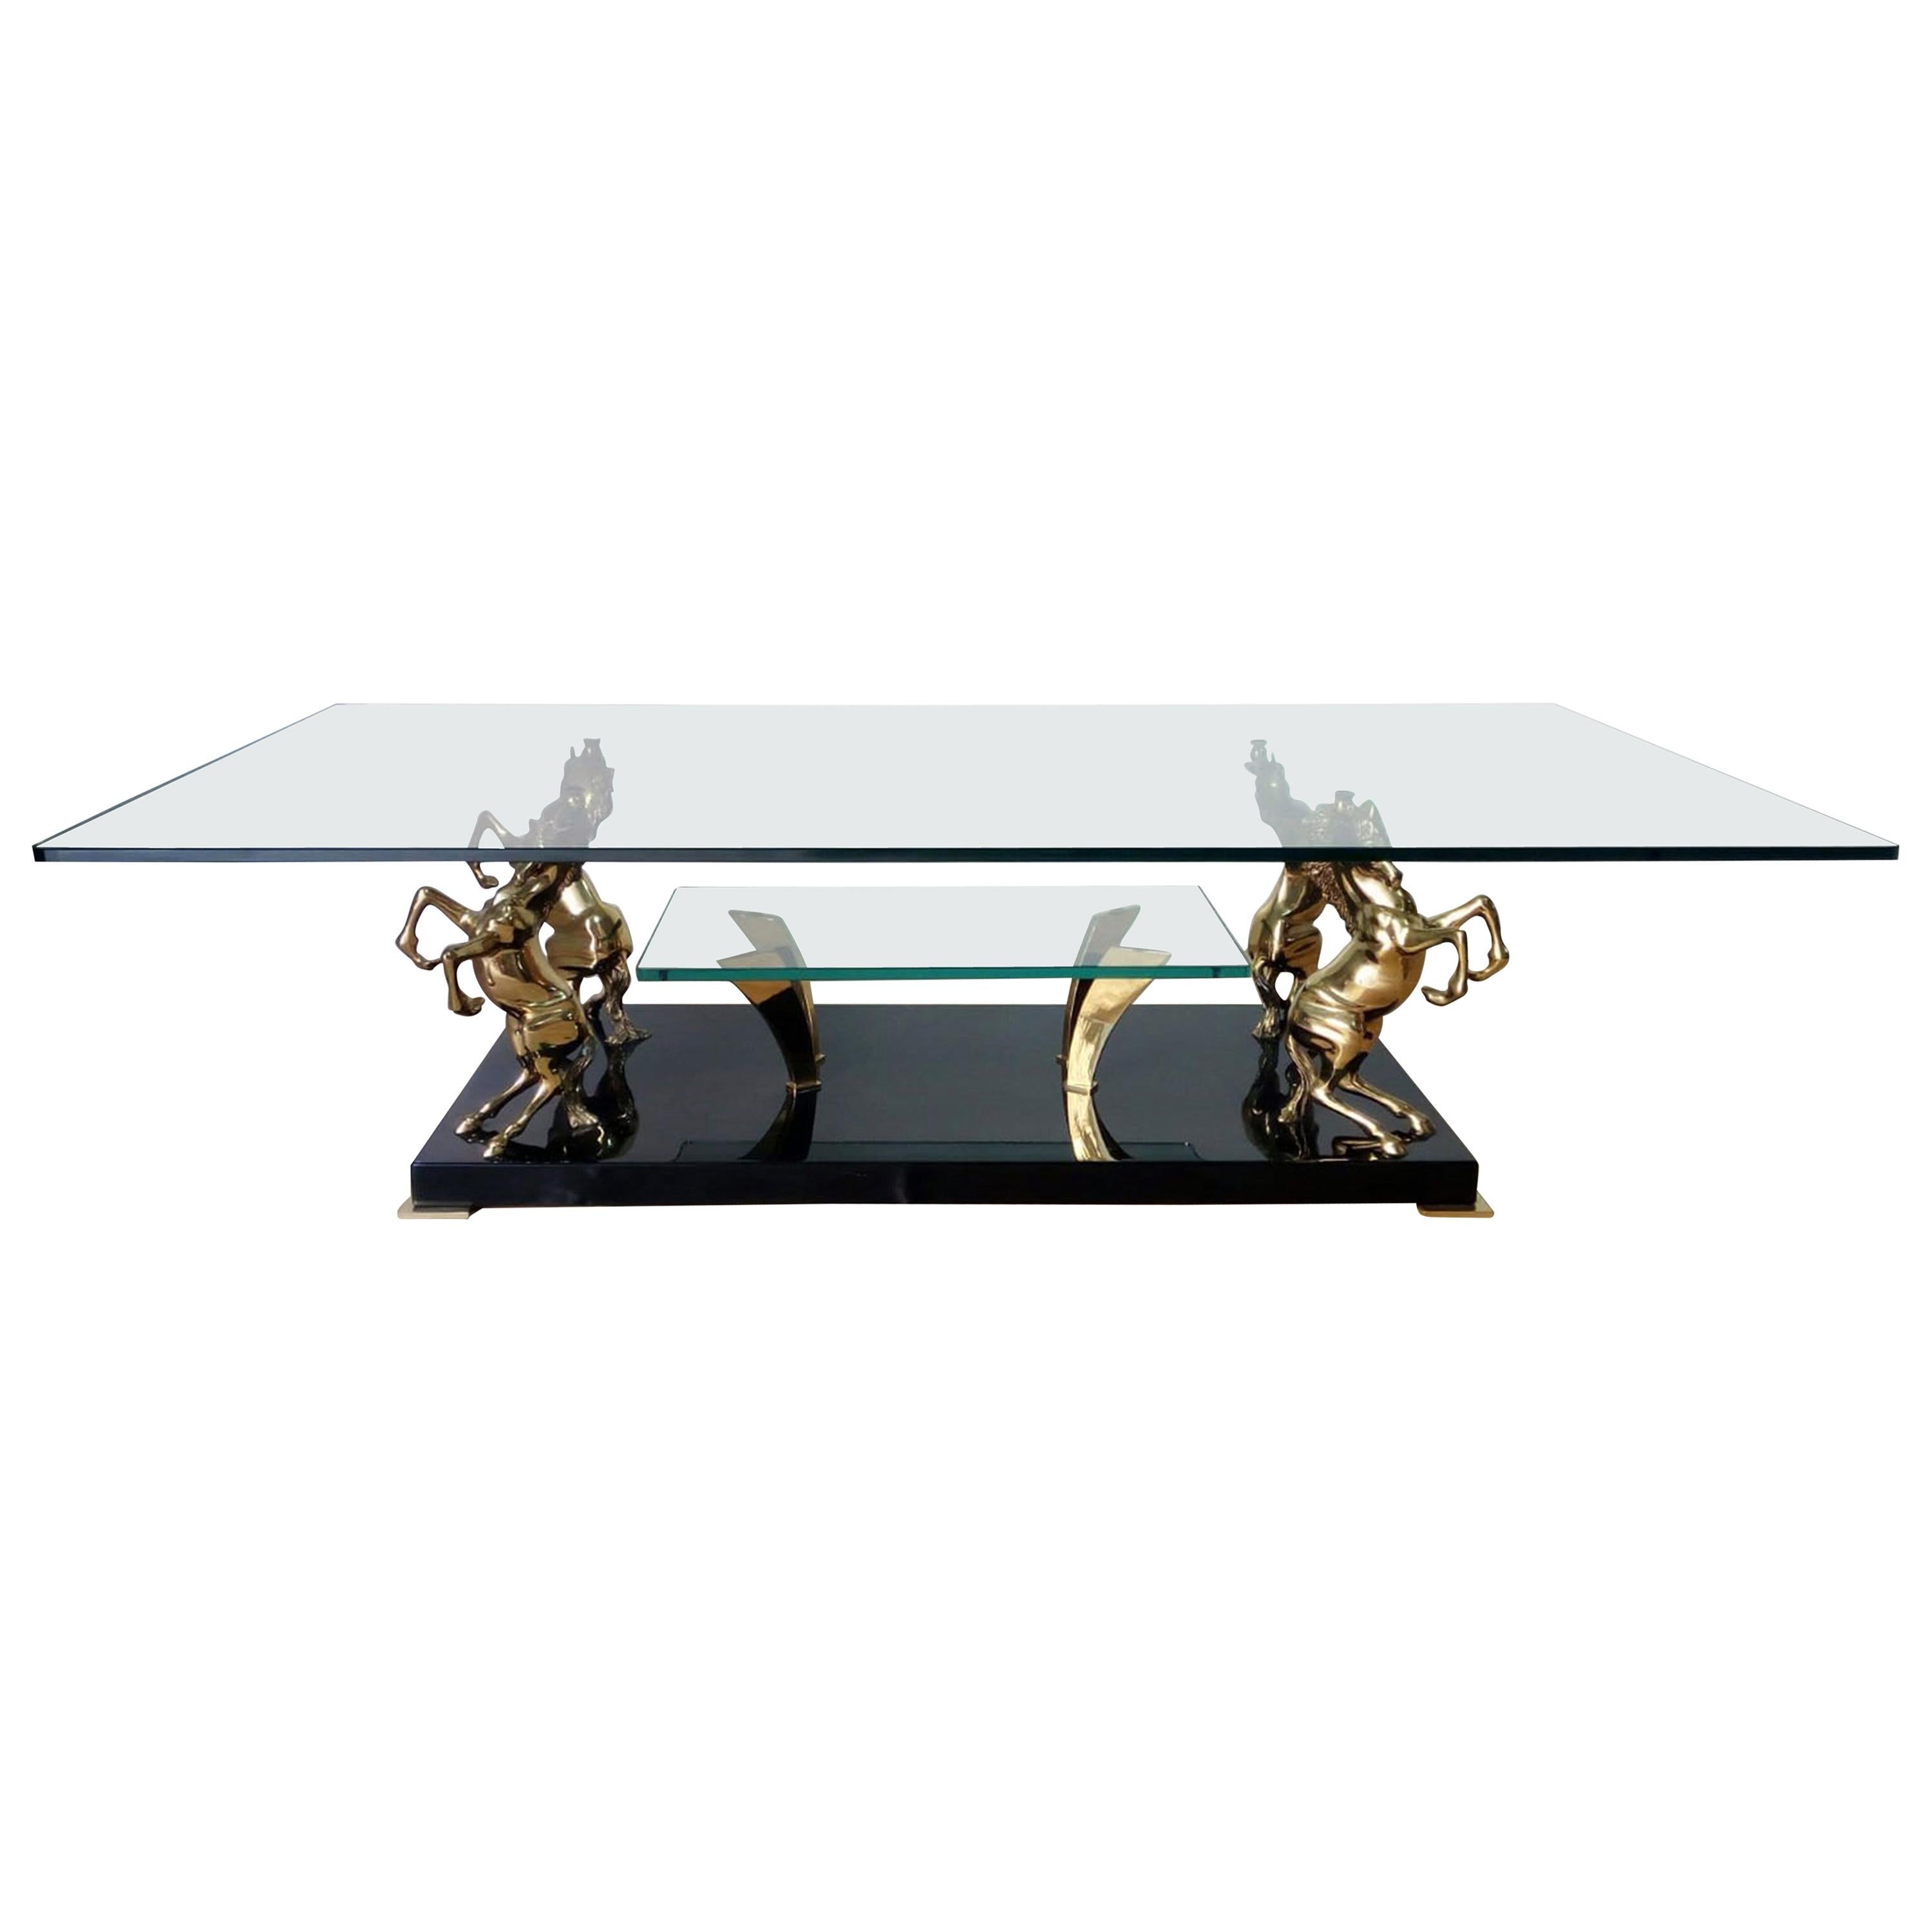 Maison Charles Mid-Century Modern Brass Horsed French Coffee Table, 1970s